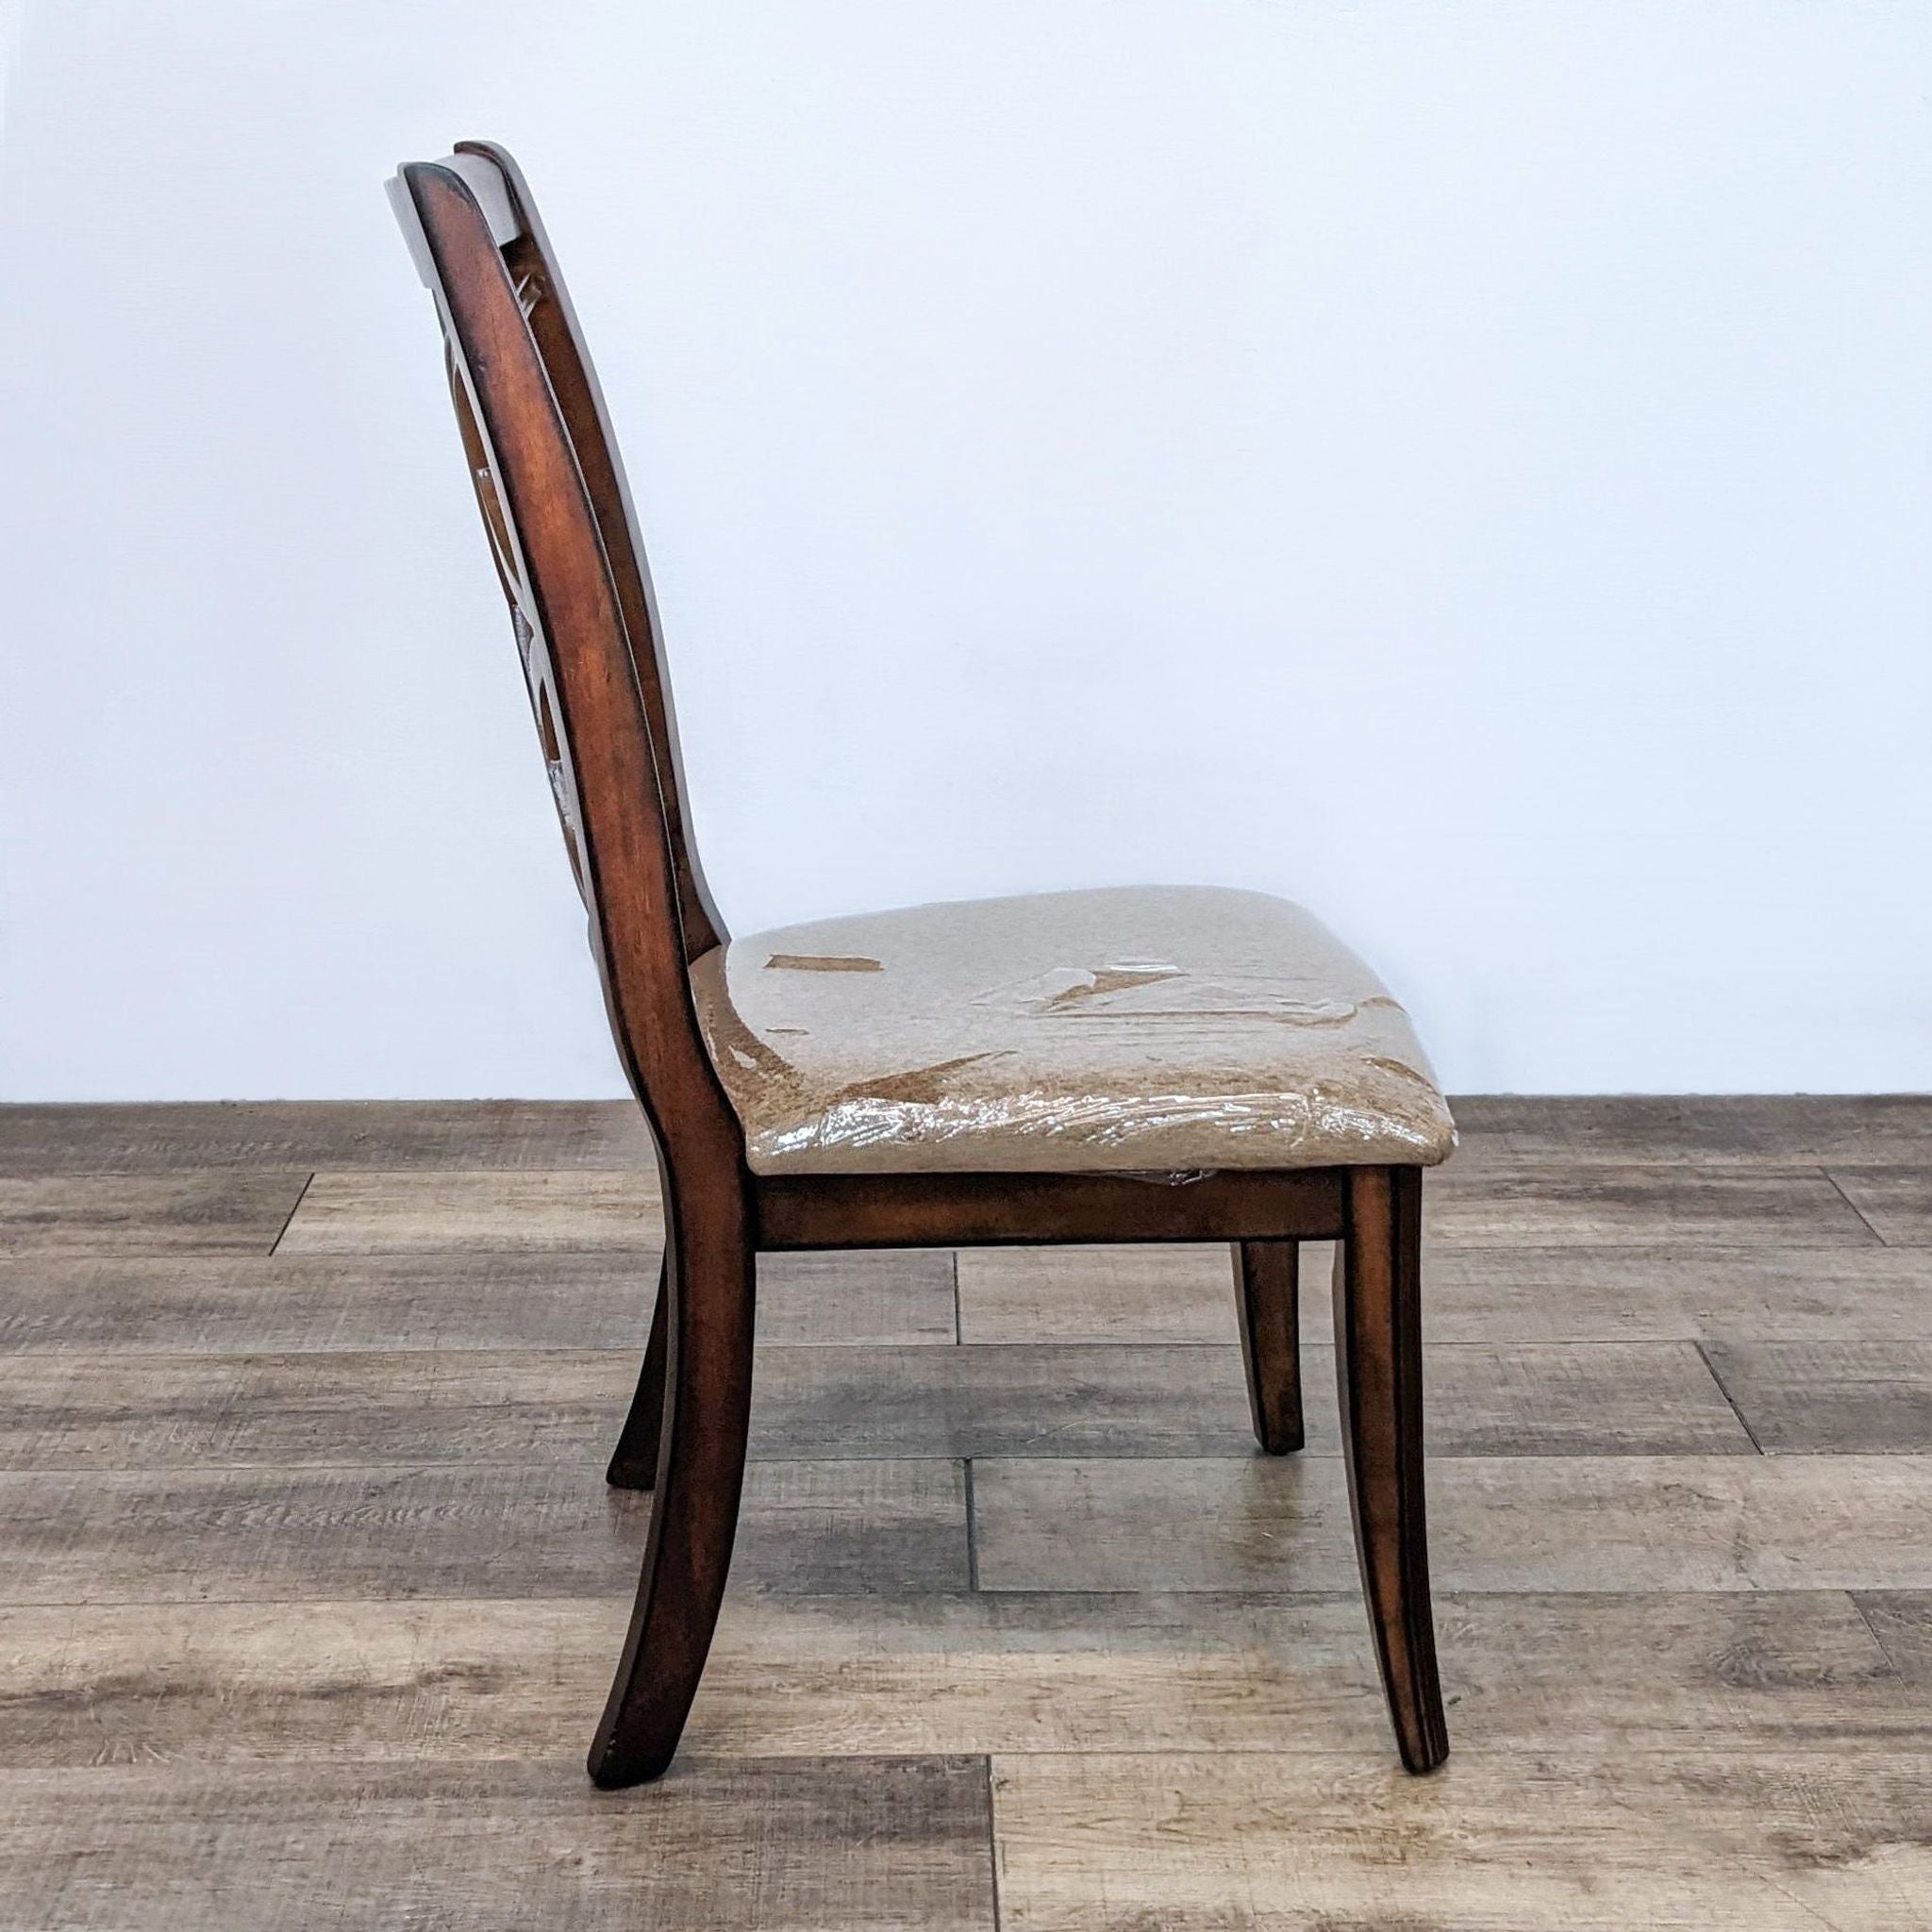 Side view of Reperch dining chair with dark wood frame and beige upholstered seat.